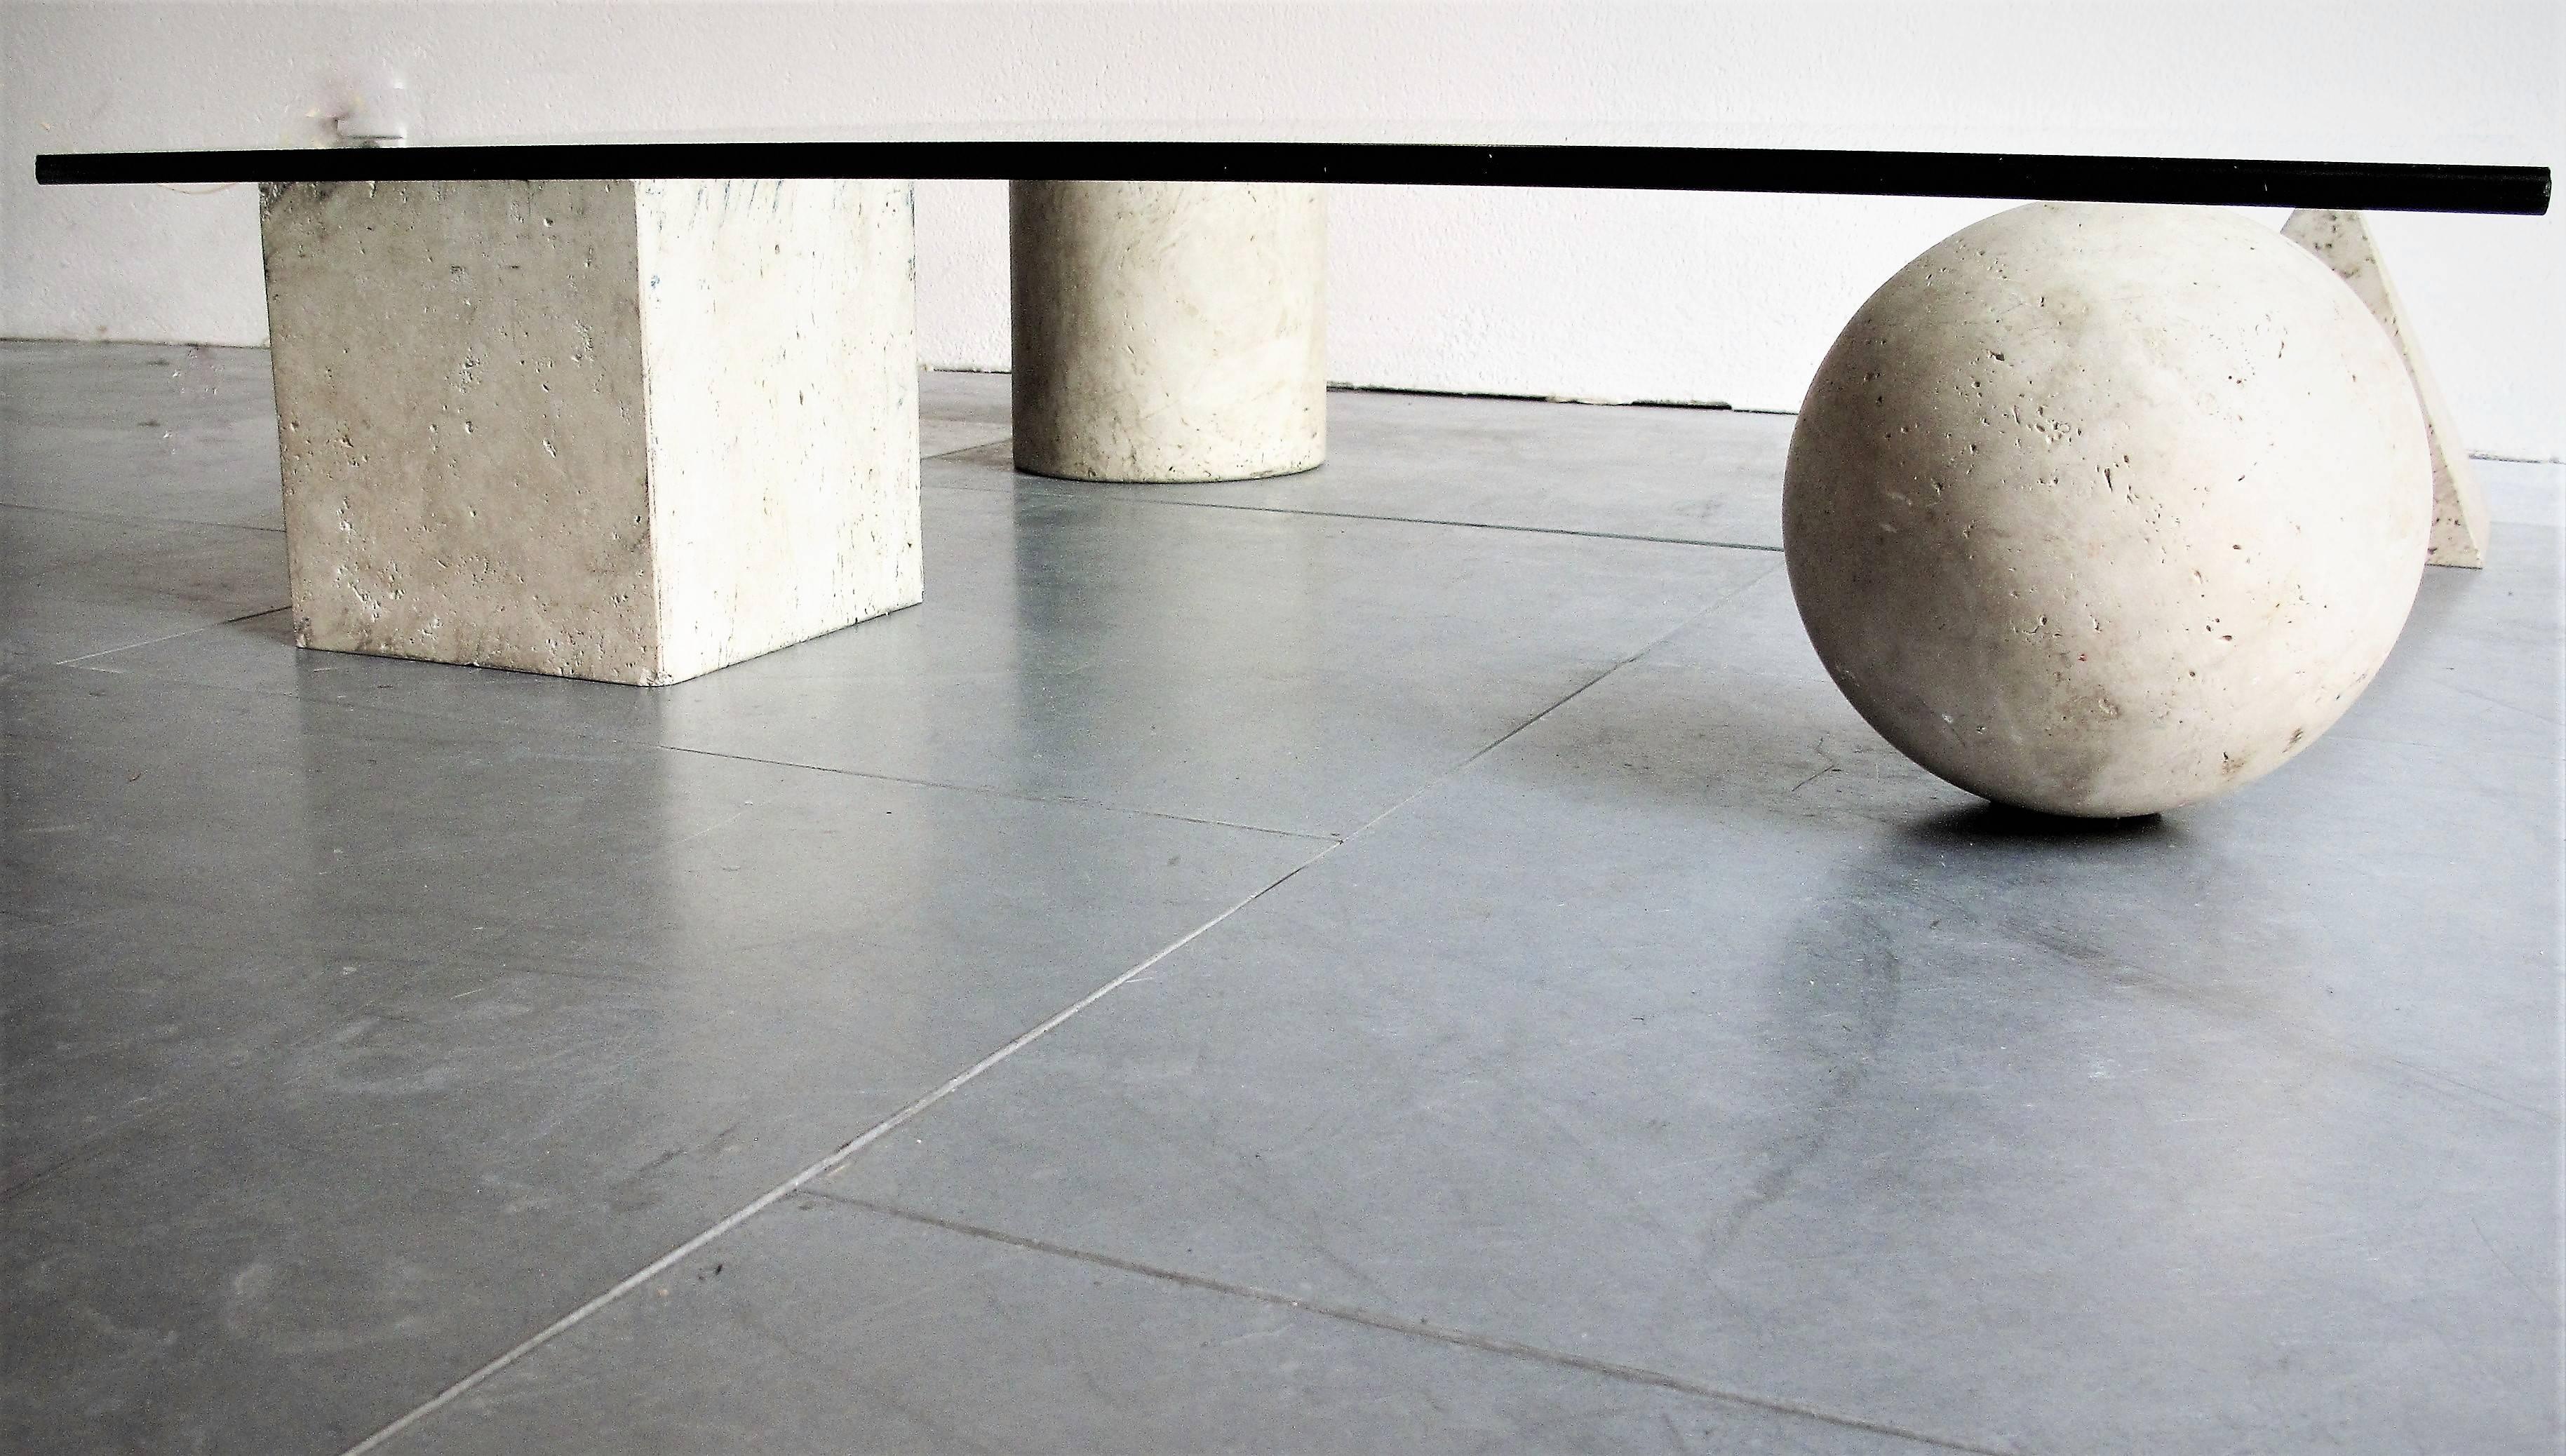 Lella & Massimo Vignelli
Metafora coffee table with travertine and glass 1979
The four elements can be positioned freely for a unique composition.